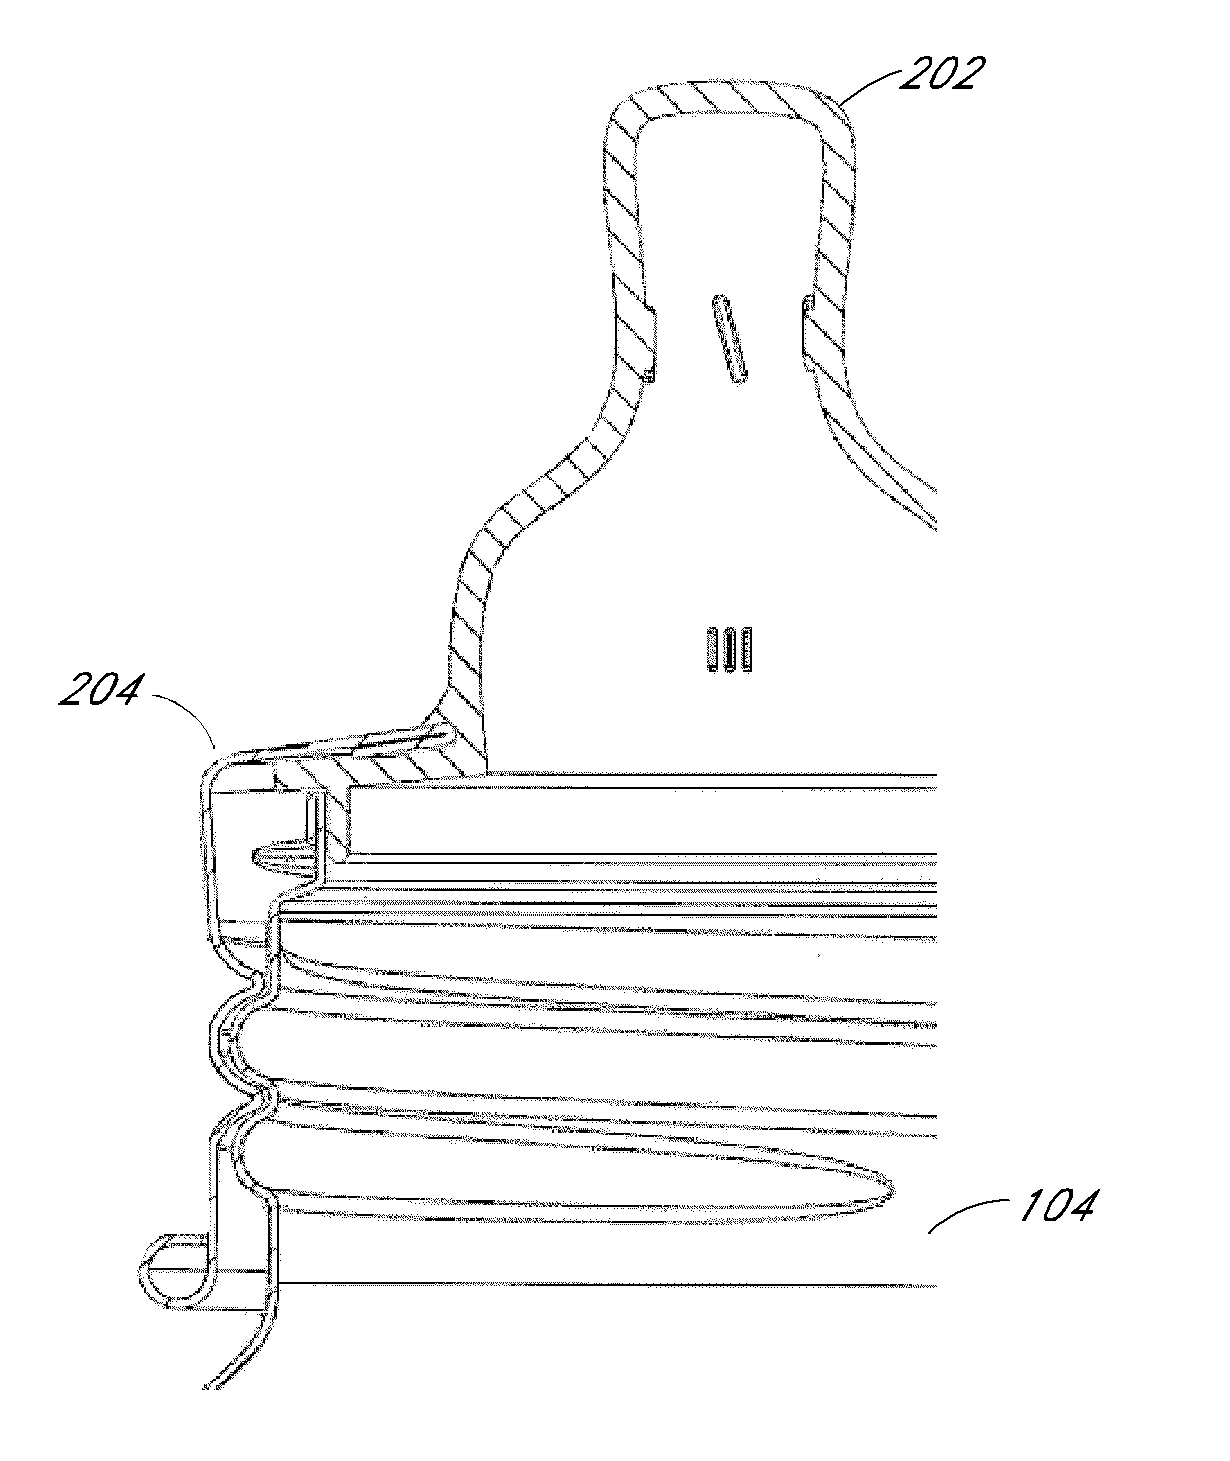 Plastic-free device for fluid storage and delivery